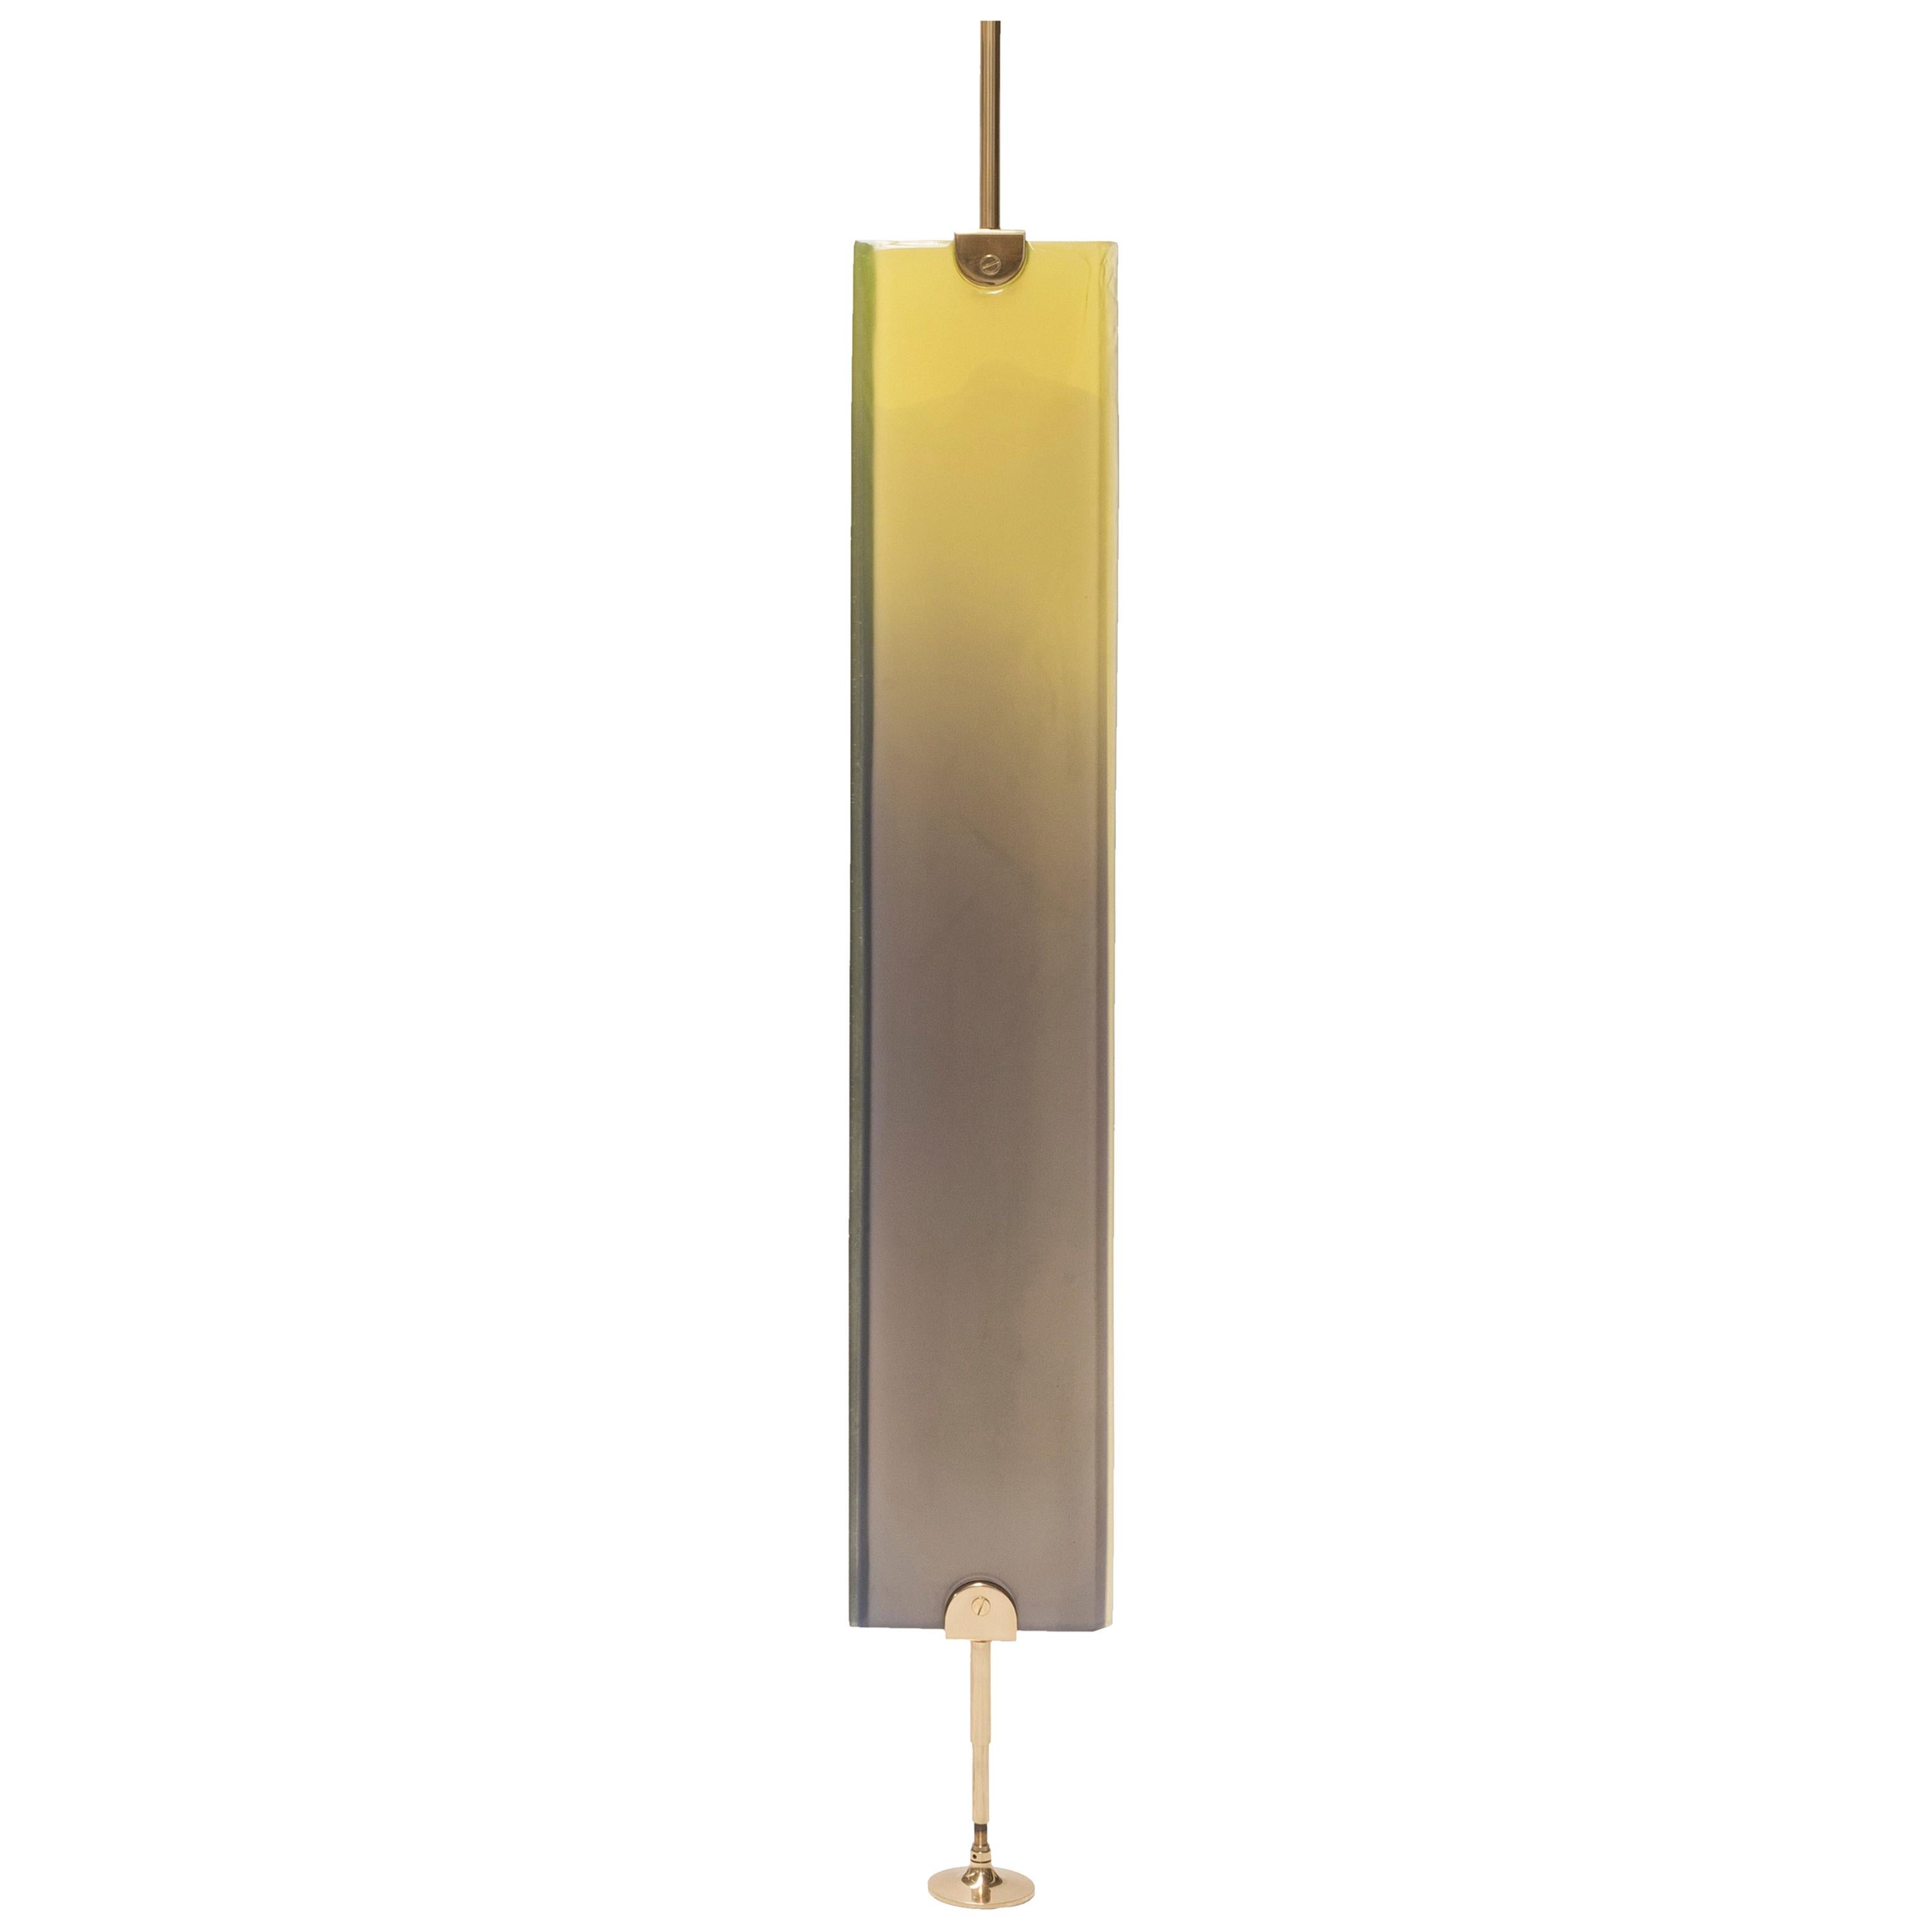 Details about   Brass Compass Divider Solid Brass Divider Best Quality Gold_8 Inch 